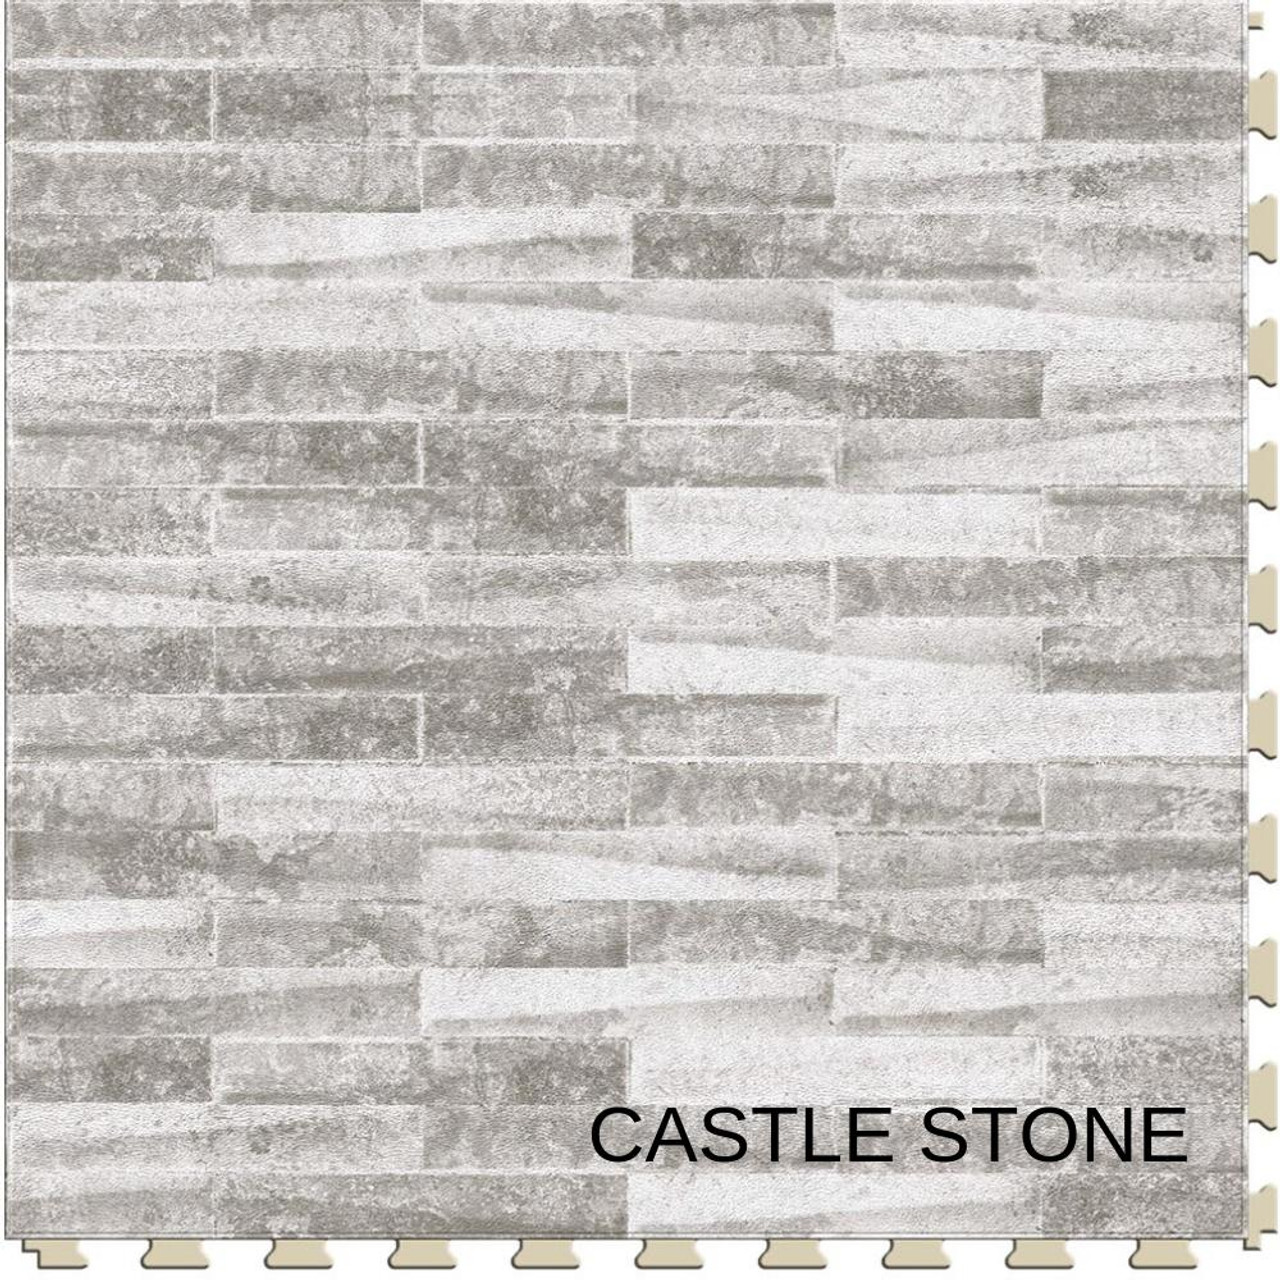  Perfection Floor Tile Natural Stone - Master Mosaic Collection (5 Color Options) | 6 Tiles/ Case | 16.62 SQFT/ Case 